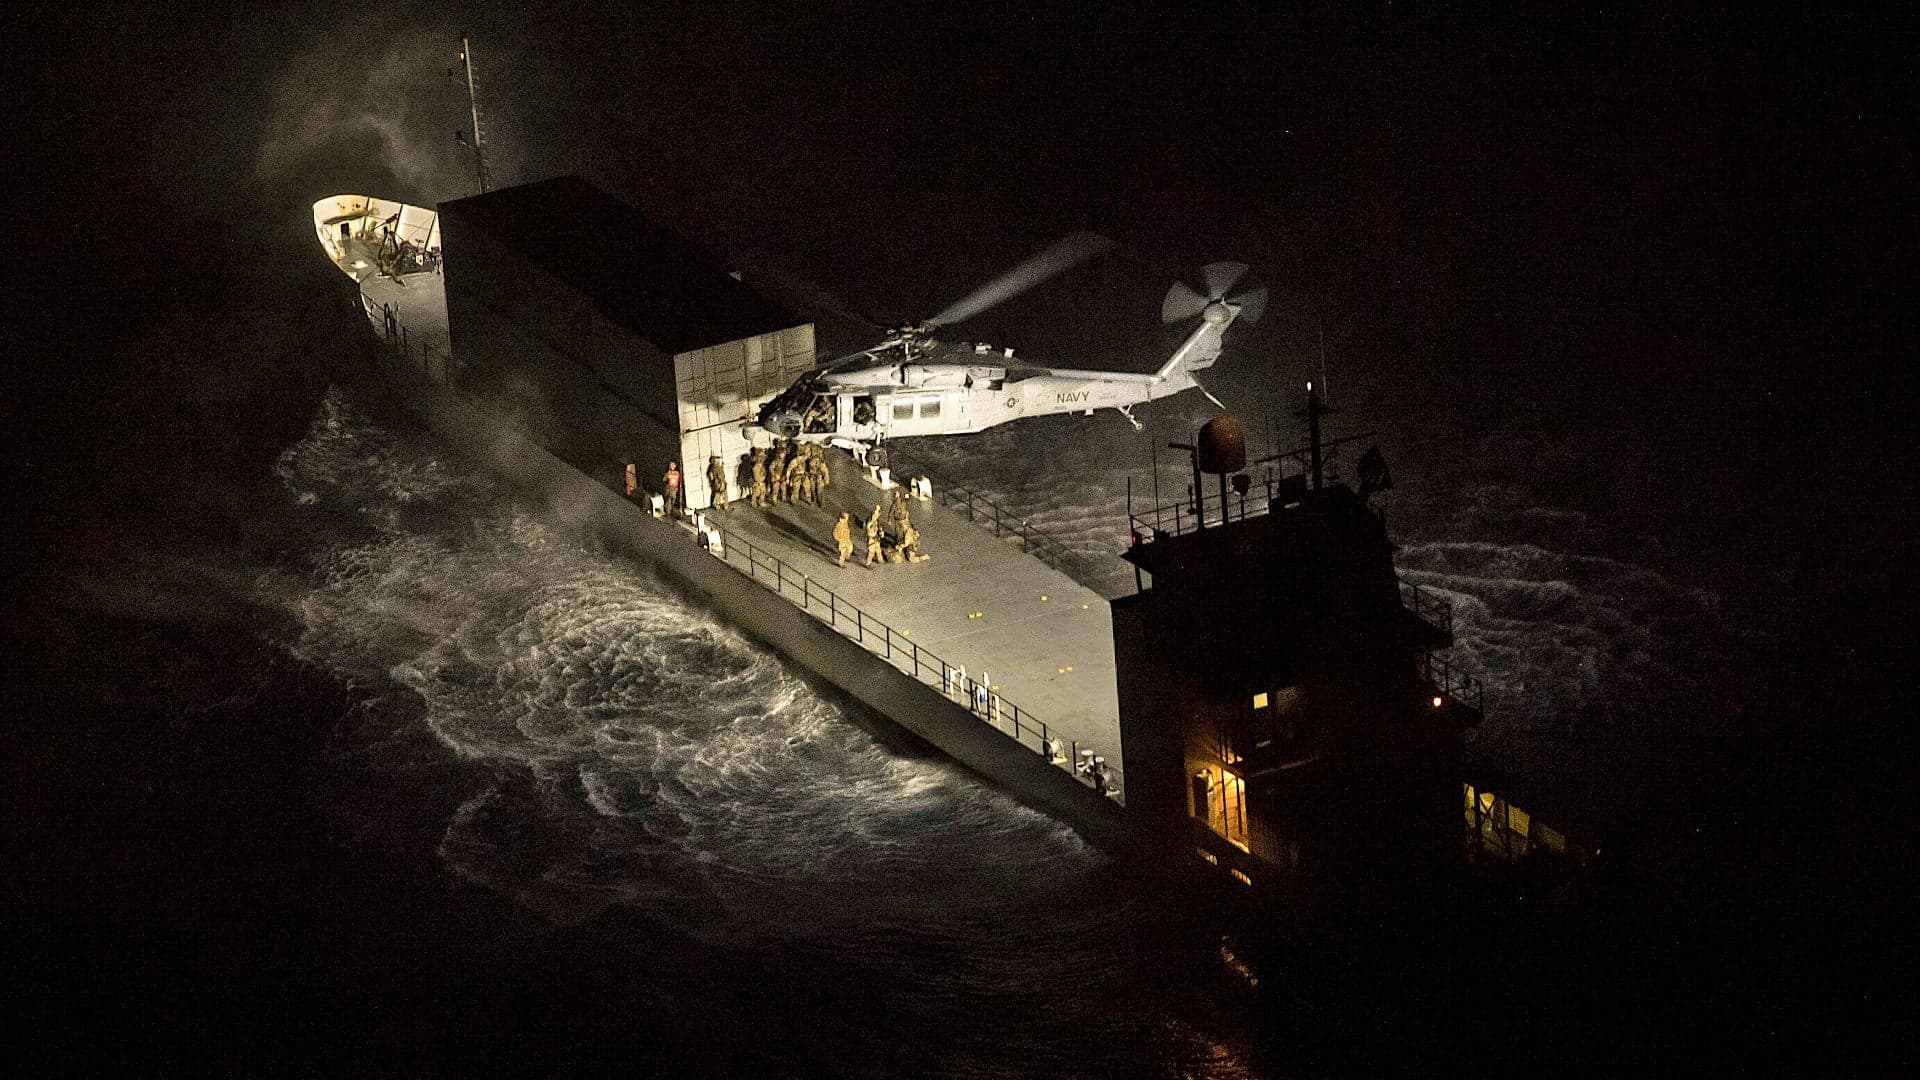 Check Out This Eerie Image Of A Navy Special Ops Seahawk Raiding A Ship In The Dead Of Night